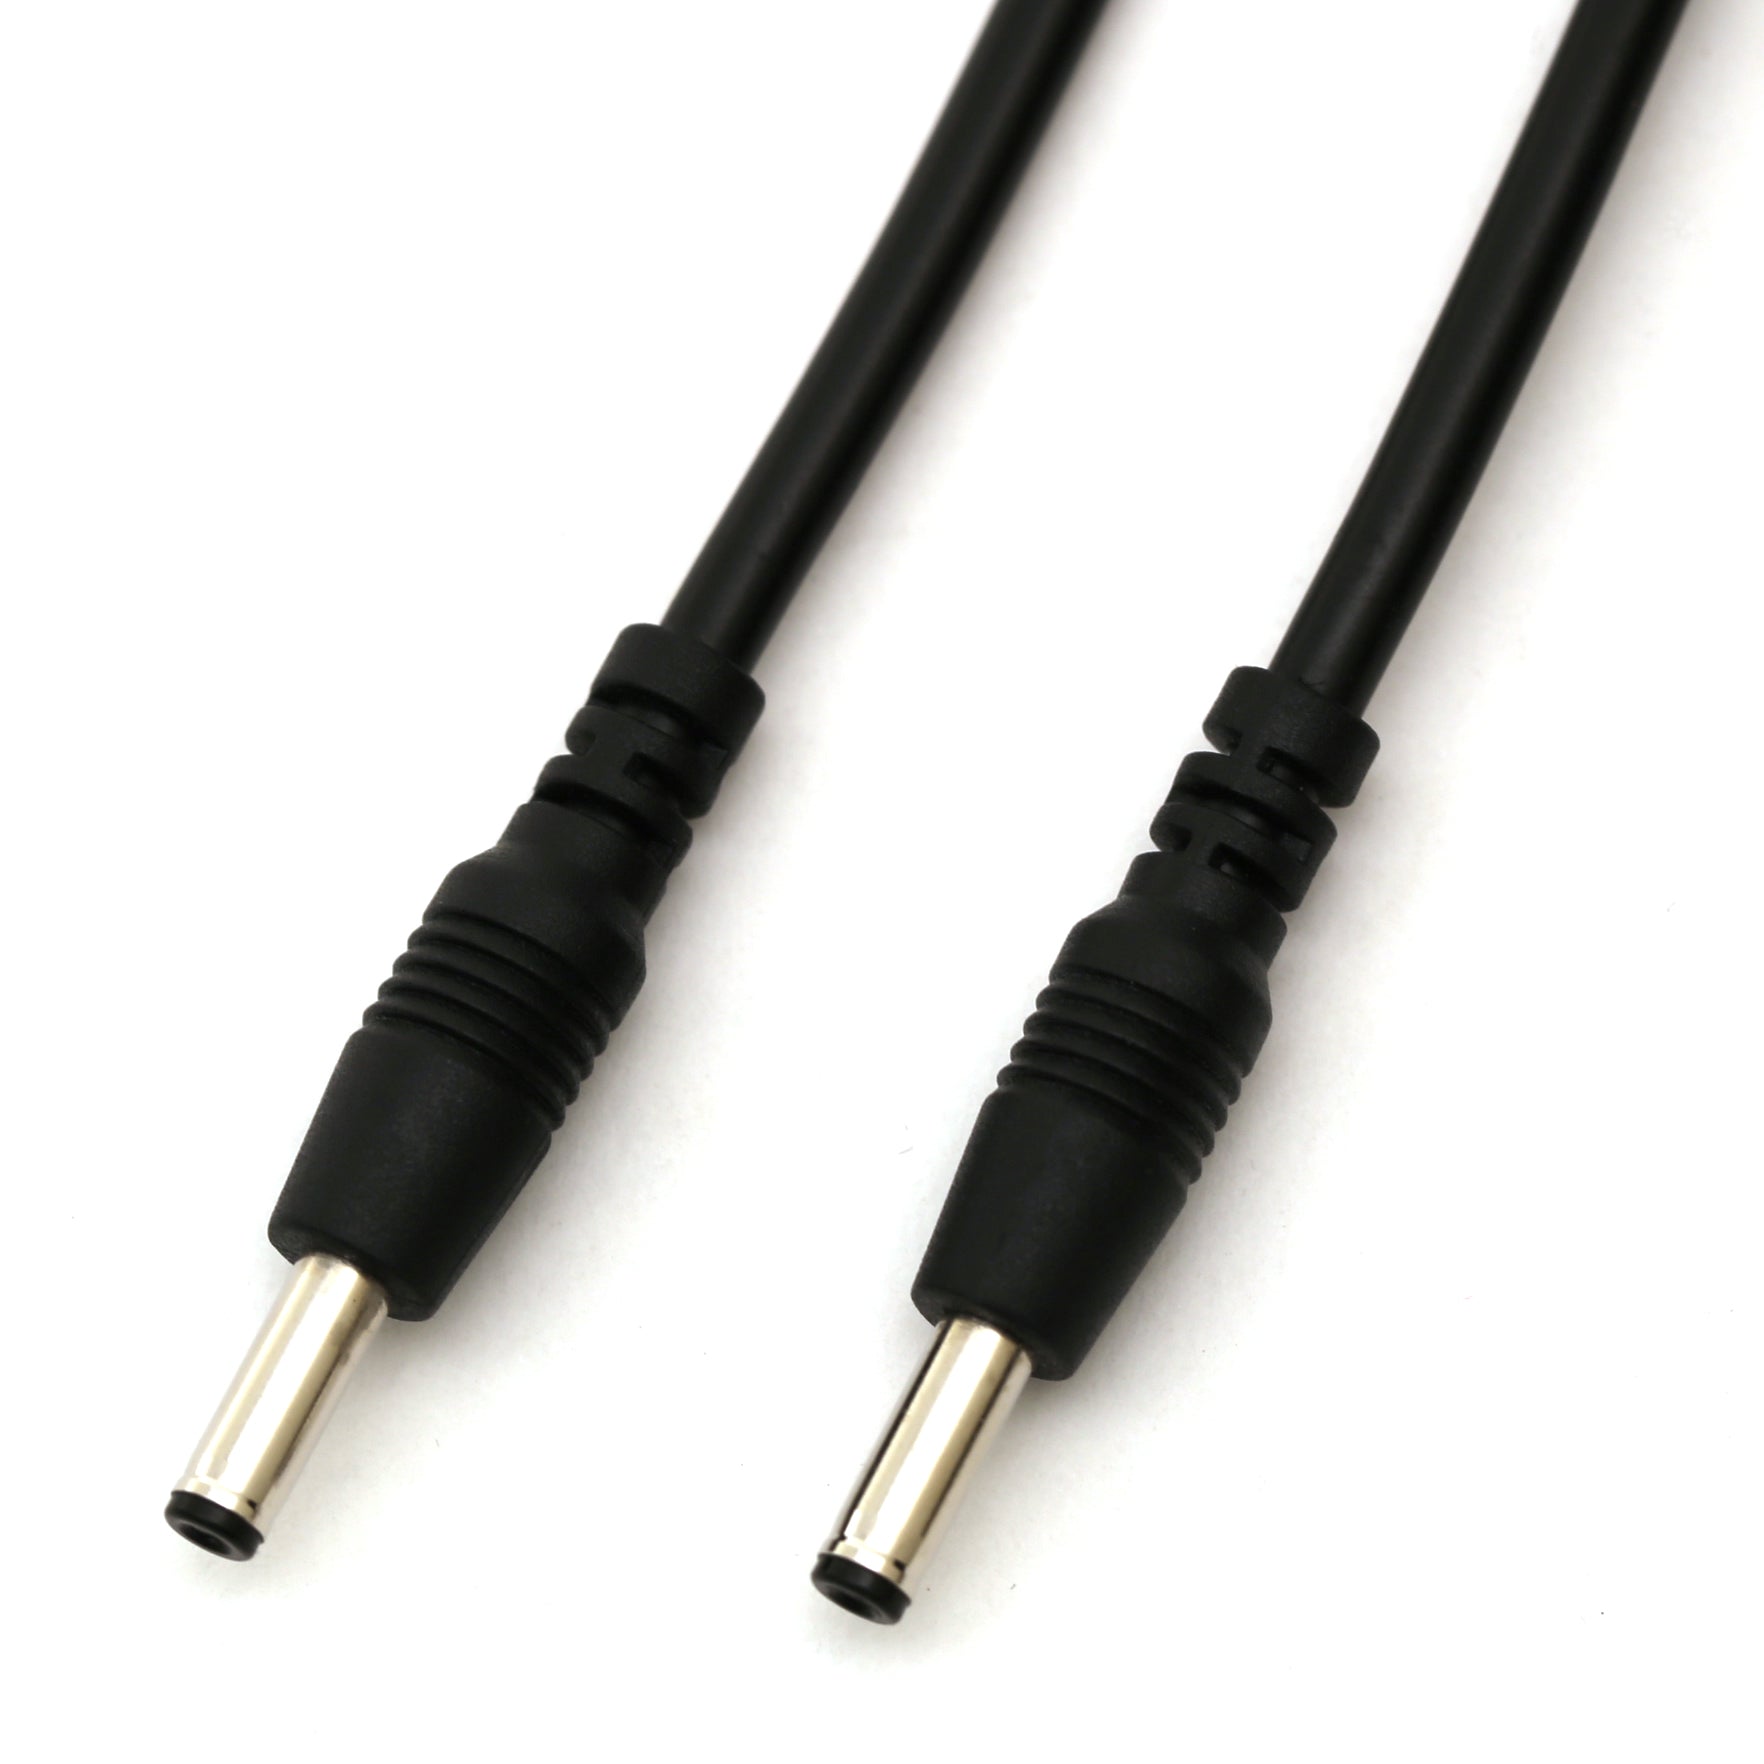 6ft In-Wall Rated Interconnect Cable for Modular LED Under Cabinet Lighting (Black)